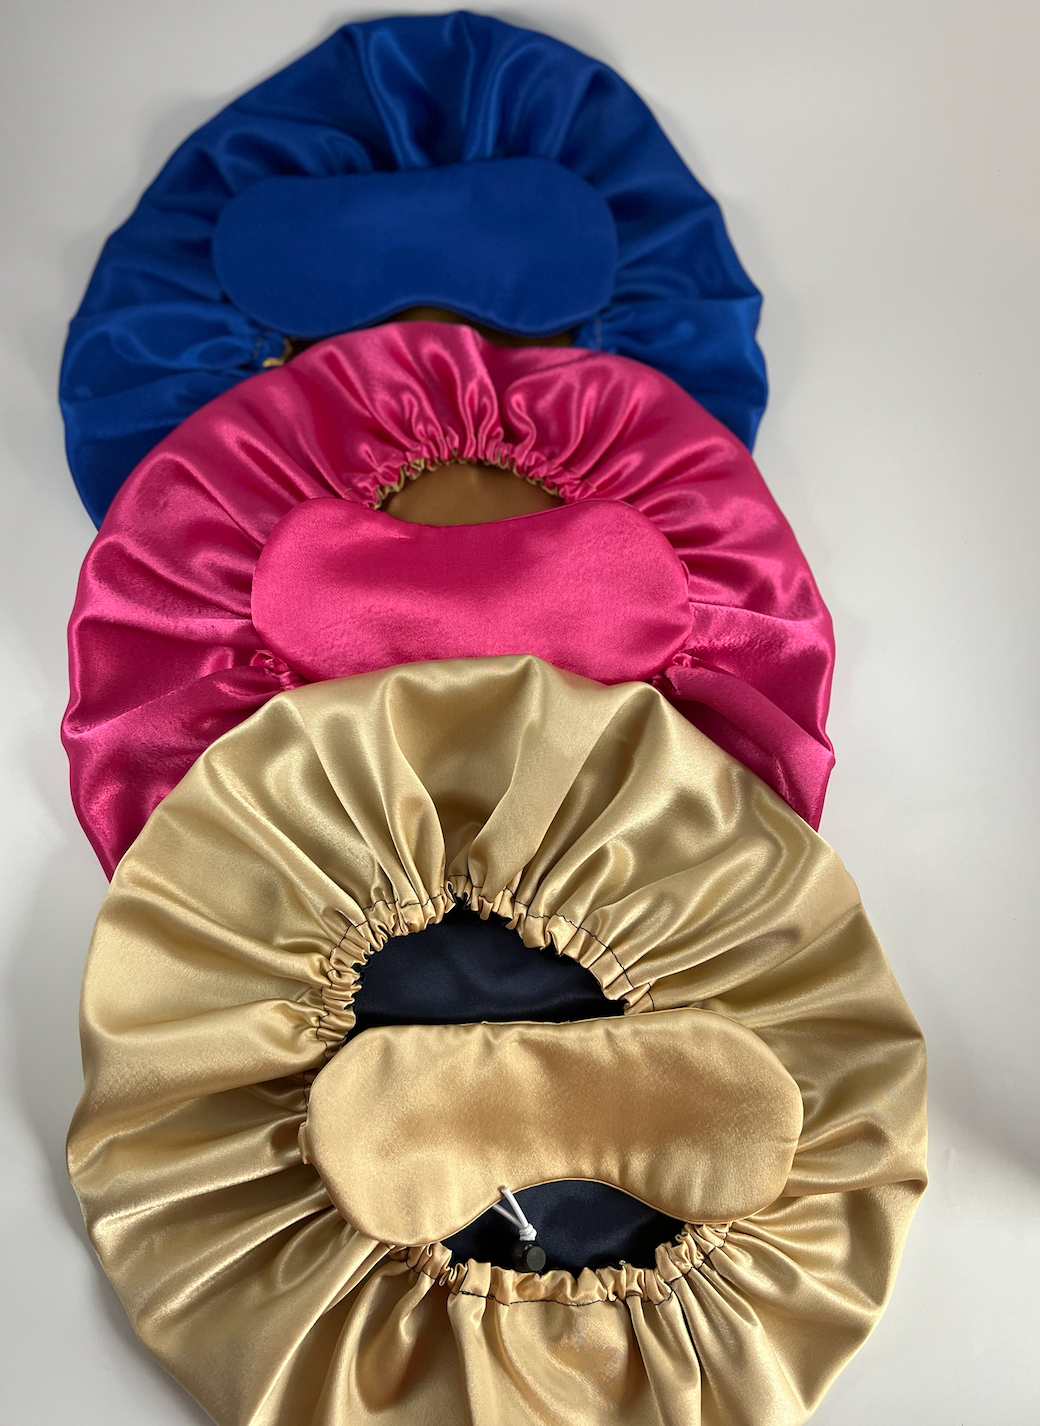 Mamma Afrique print and Satin lined Hair Bonnet